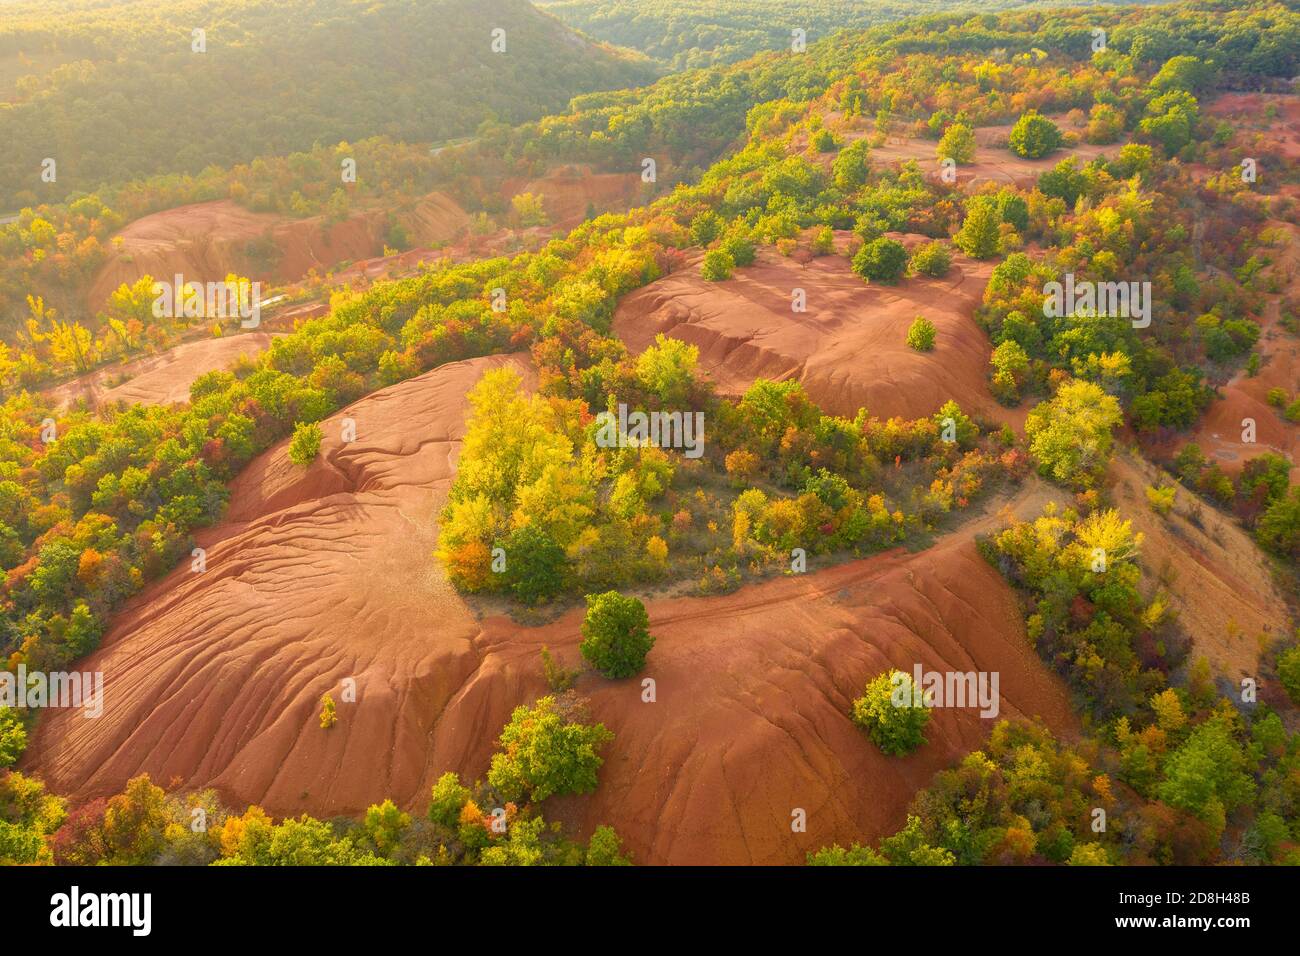 Gant, Hungary - Aerial view of abandoned bauxite mine, bauxite formation. Red and orange colored surface, bauxite texture. Warm fall colors. Stock Photo